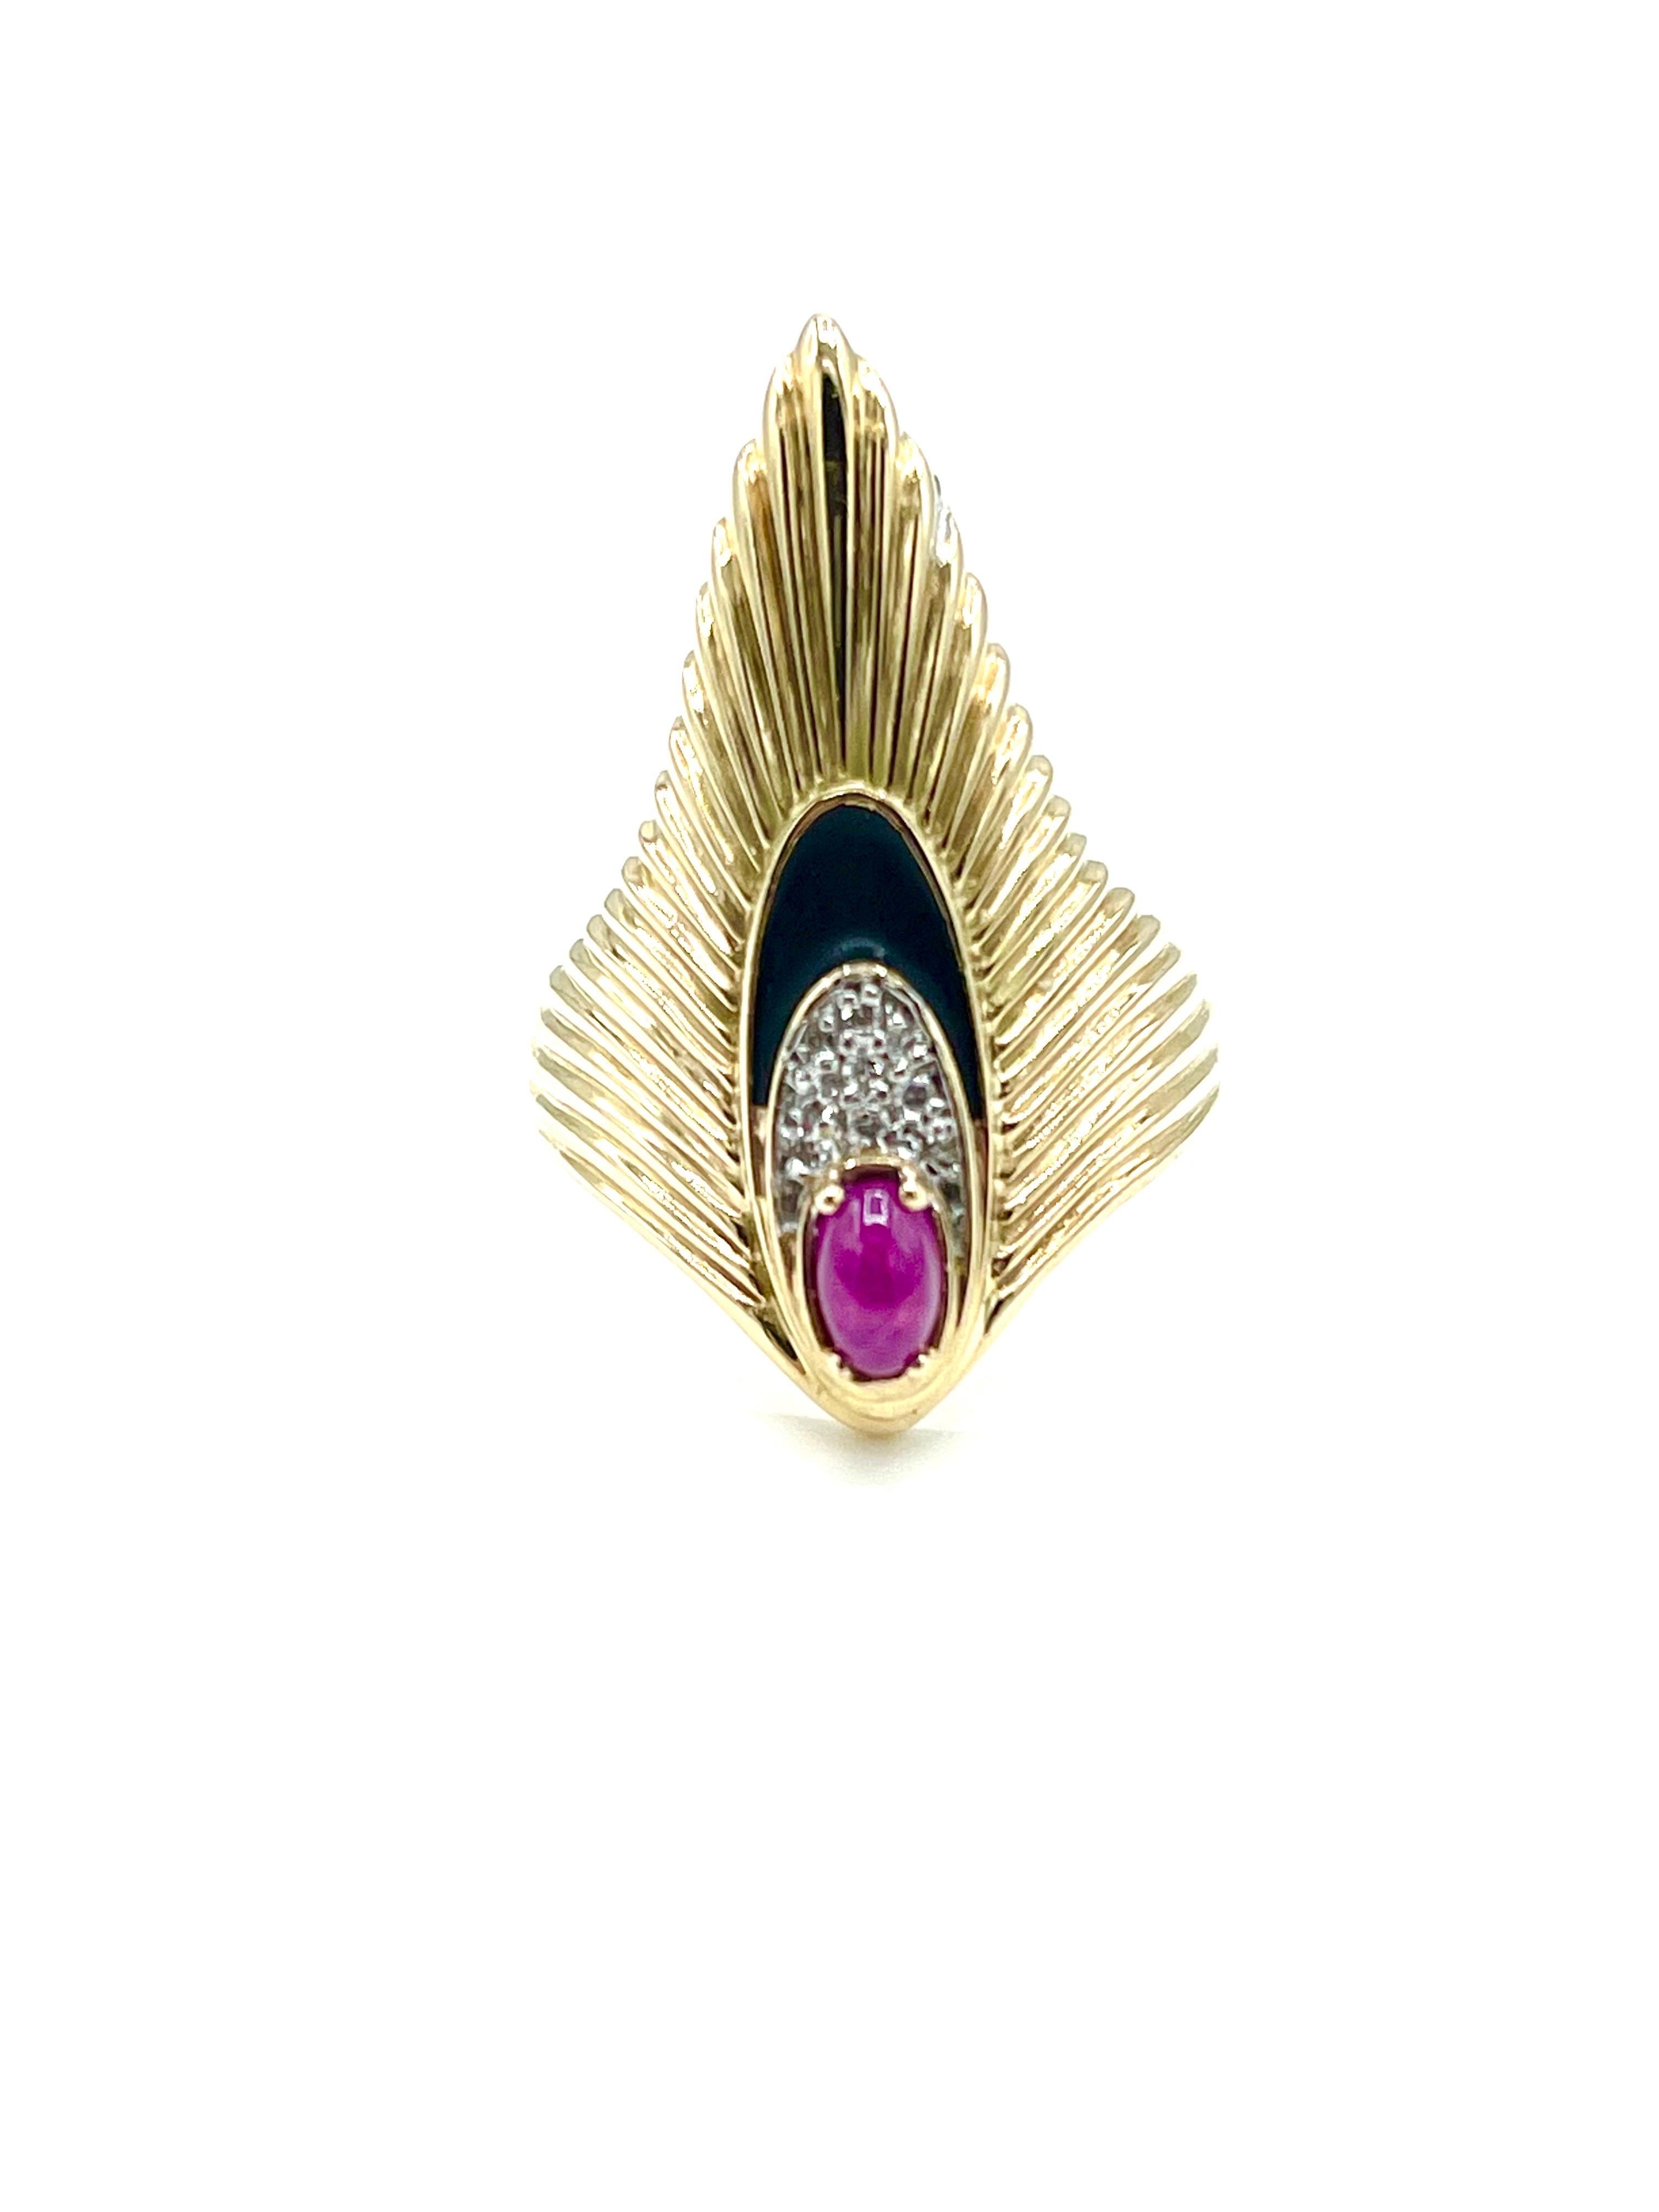 An elegant cocktail ring by designer Erte.  The ring features a cabochon cut Ruby, with round single cut Diamonds and black enamel , set in 14K yellow gold.  The inside of the ring is signed 